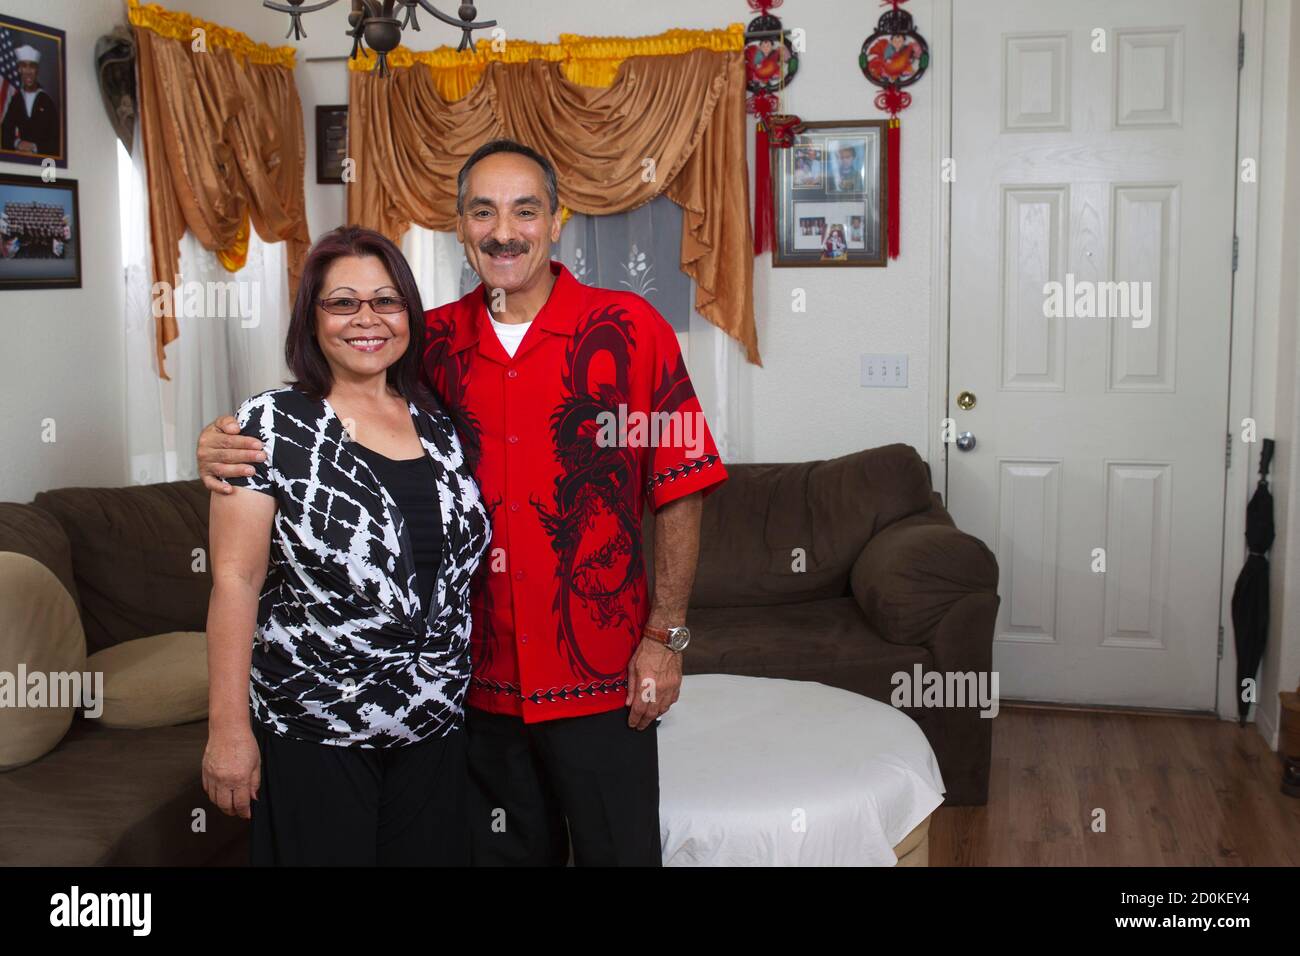 Felisa Medalla and Hubert Pereira pose in their home in Las Vegas, Nevada October 5, 2012. Pereira, 50, recently switched his registration from Democrat to 'nonpartisan' after suffering a yearlong bout of unemployment. Medalla, a waitress who was laid off seven months ago, complained: 'People say Obama is doing good. But how can he be doing good when I don't have a job?' Her question goes to the heart of why, despite President Barack Obama's recent uptick in the polls, his battle for reelection against Republican nominee Mitt Romney remains too close to call. Picture taken October 5, 2012. To  Stock Photo